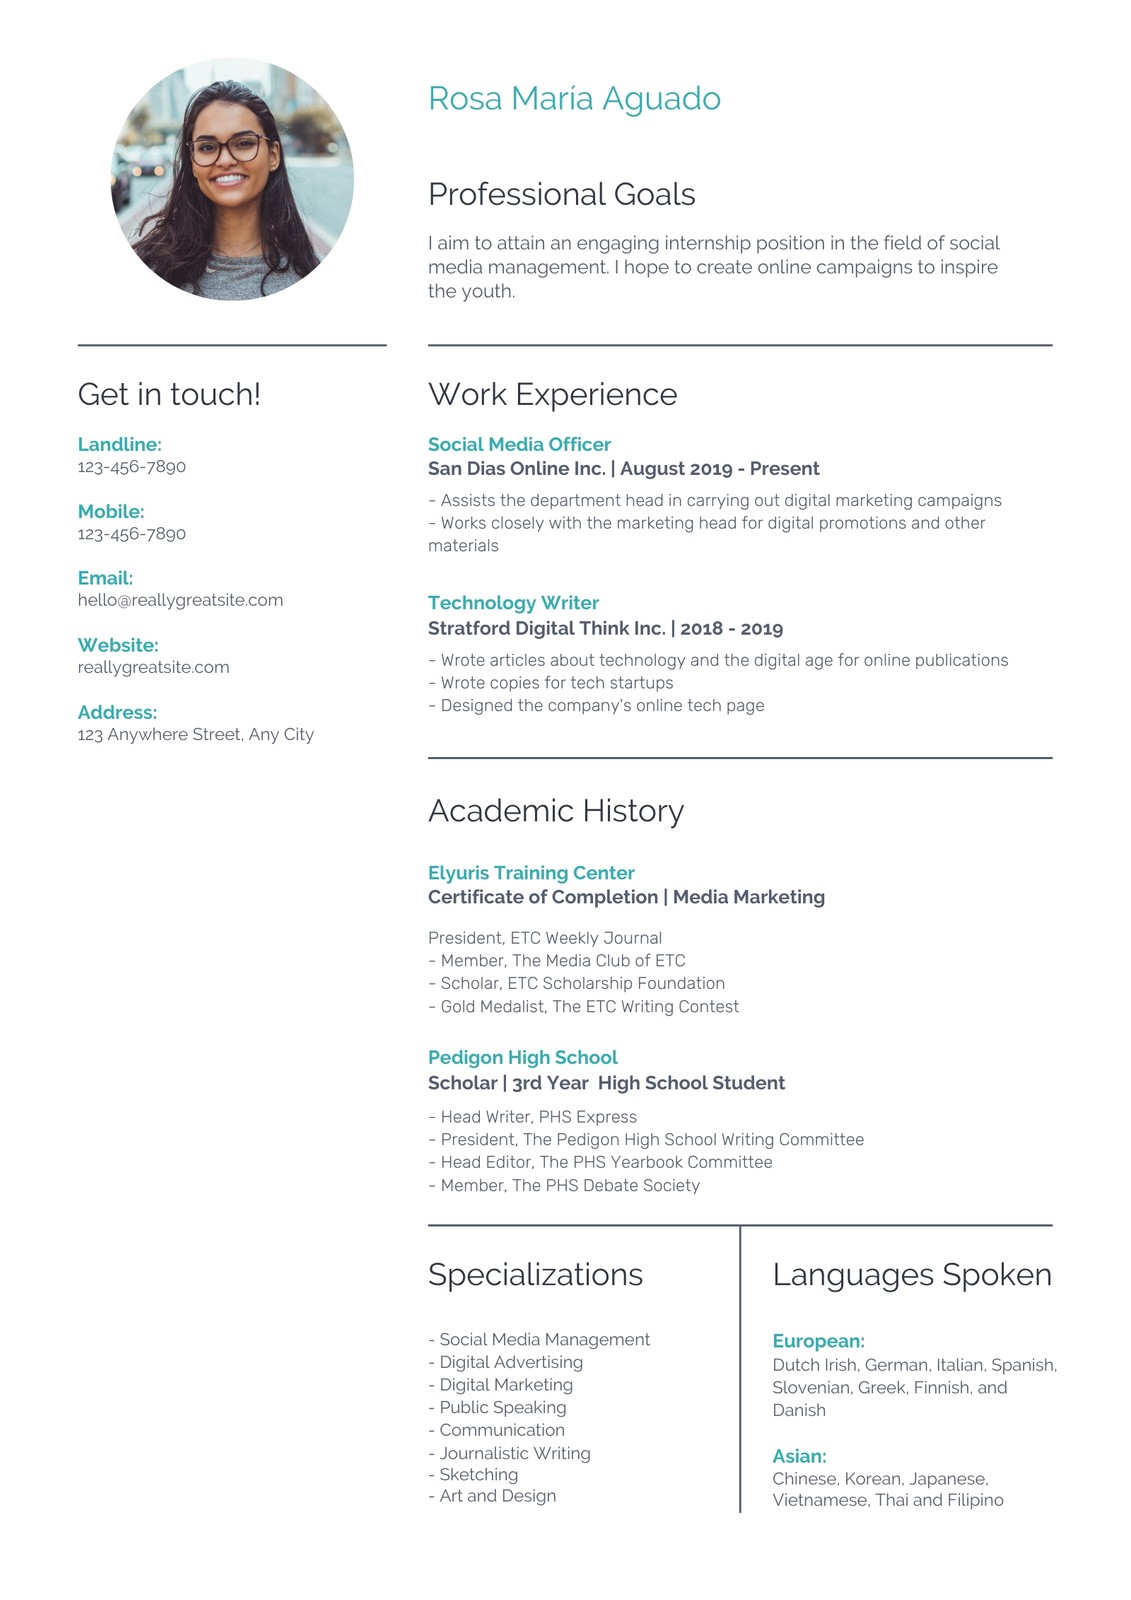 experience resume for graphic designer   36